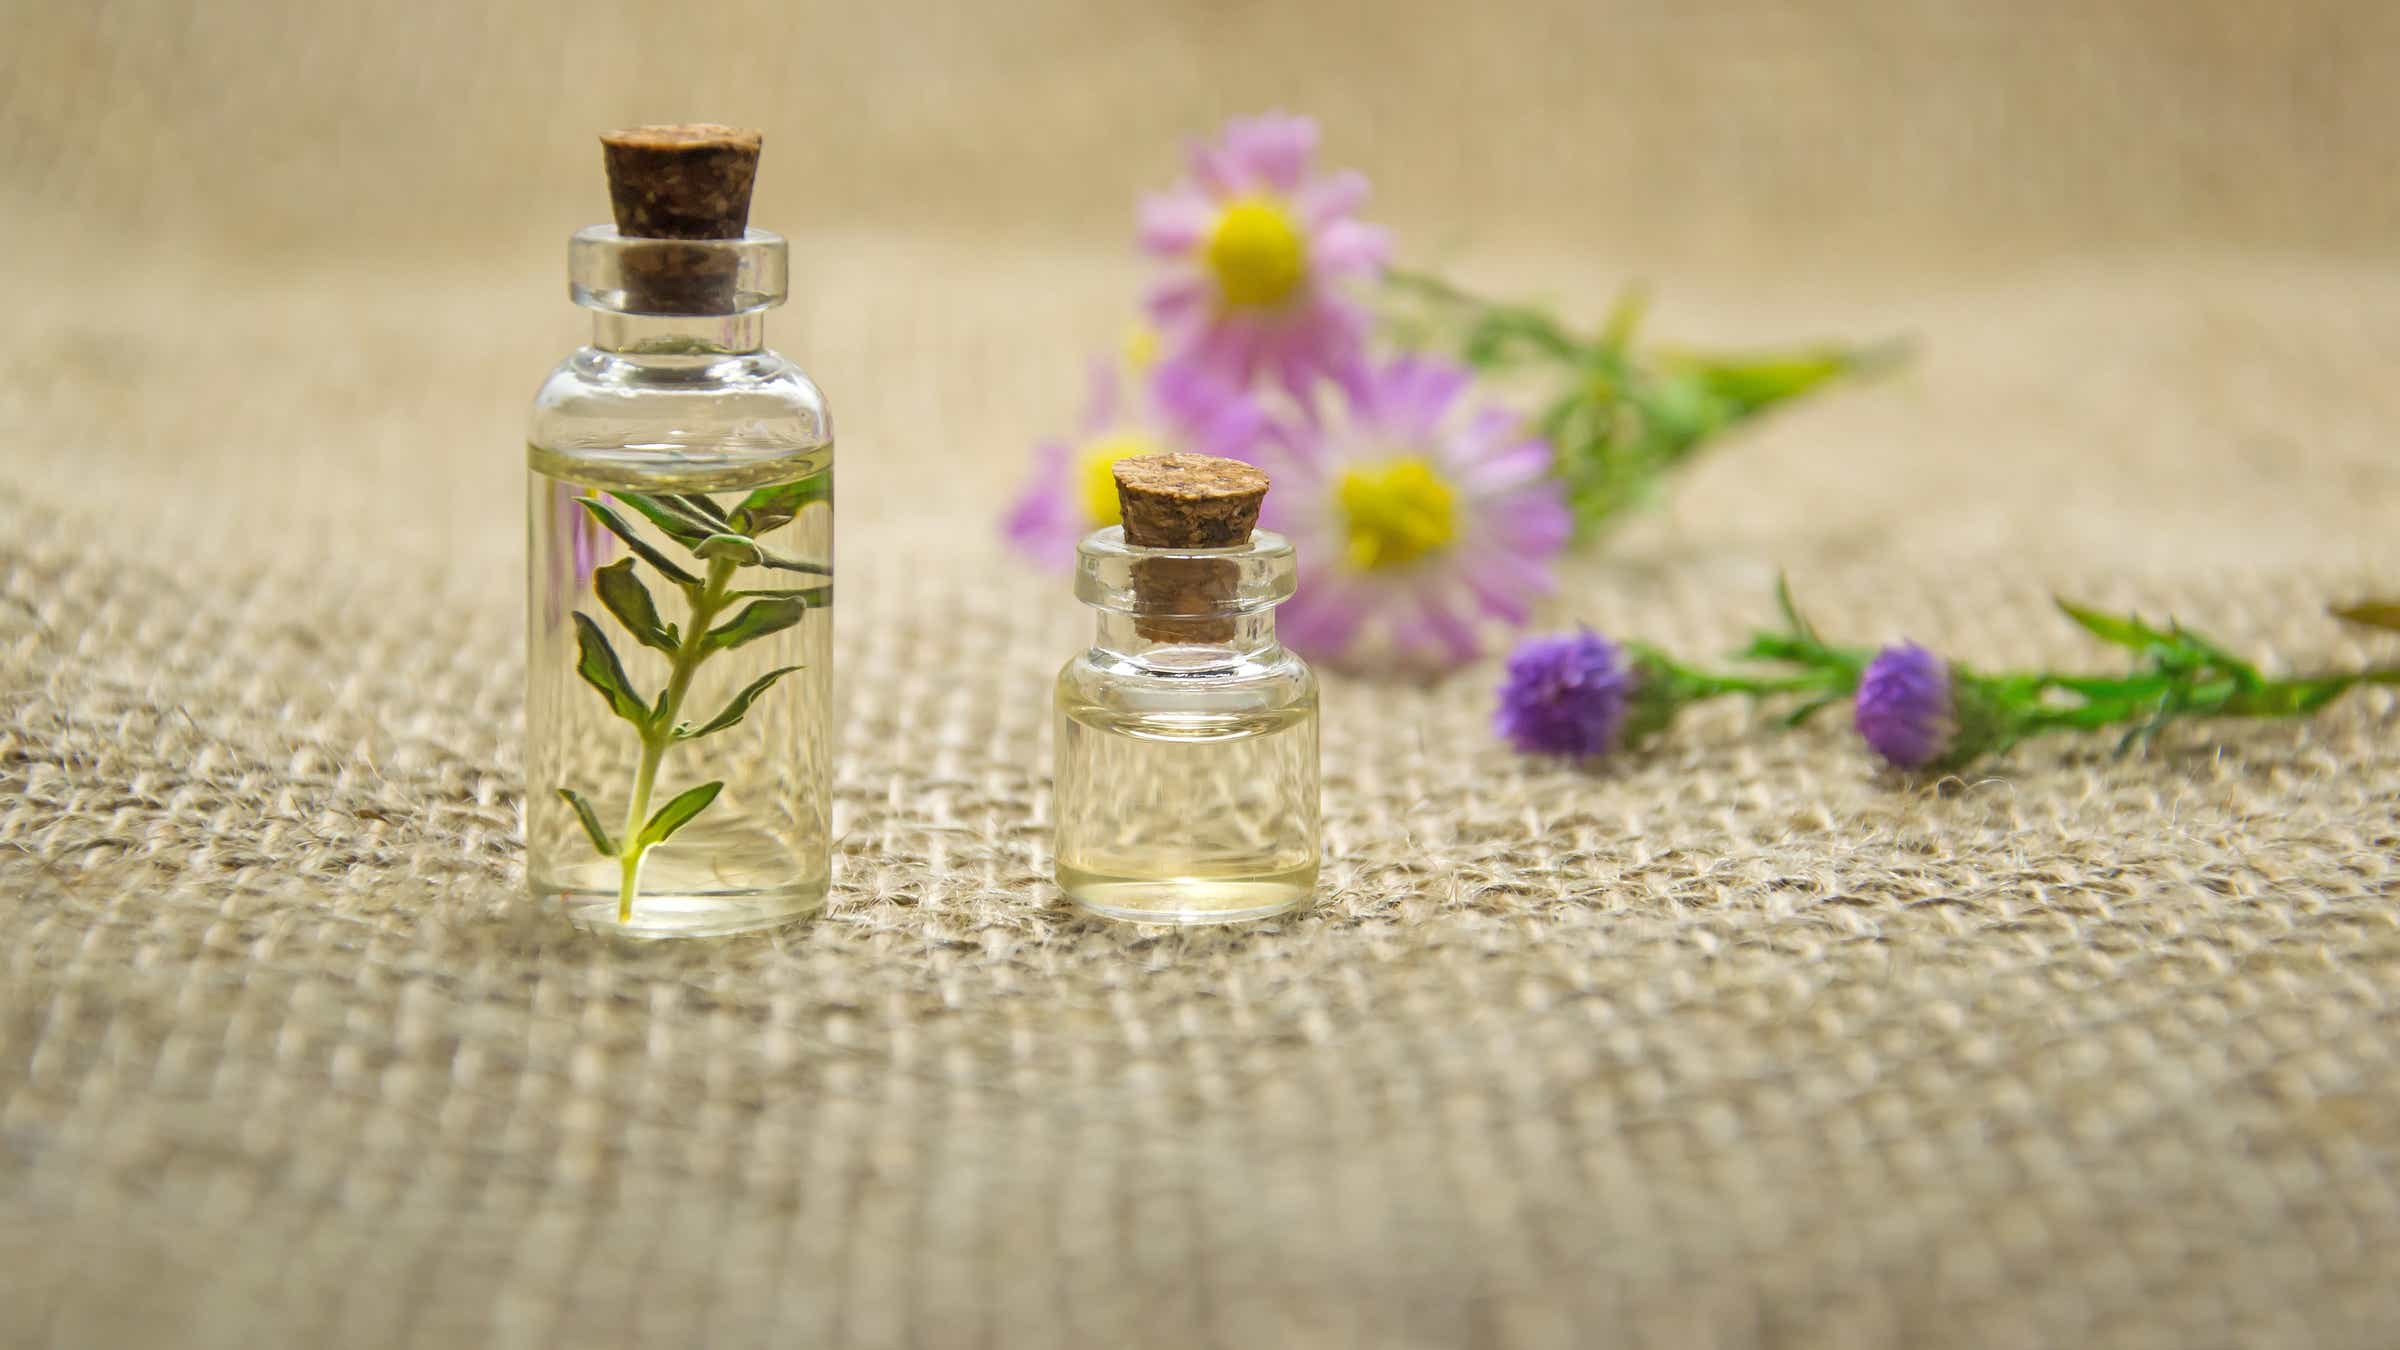 Company insurance is intended to safeguard the financial assets of a business owner and is a necessary investment for an aromatherapy business.